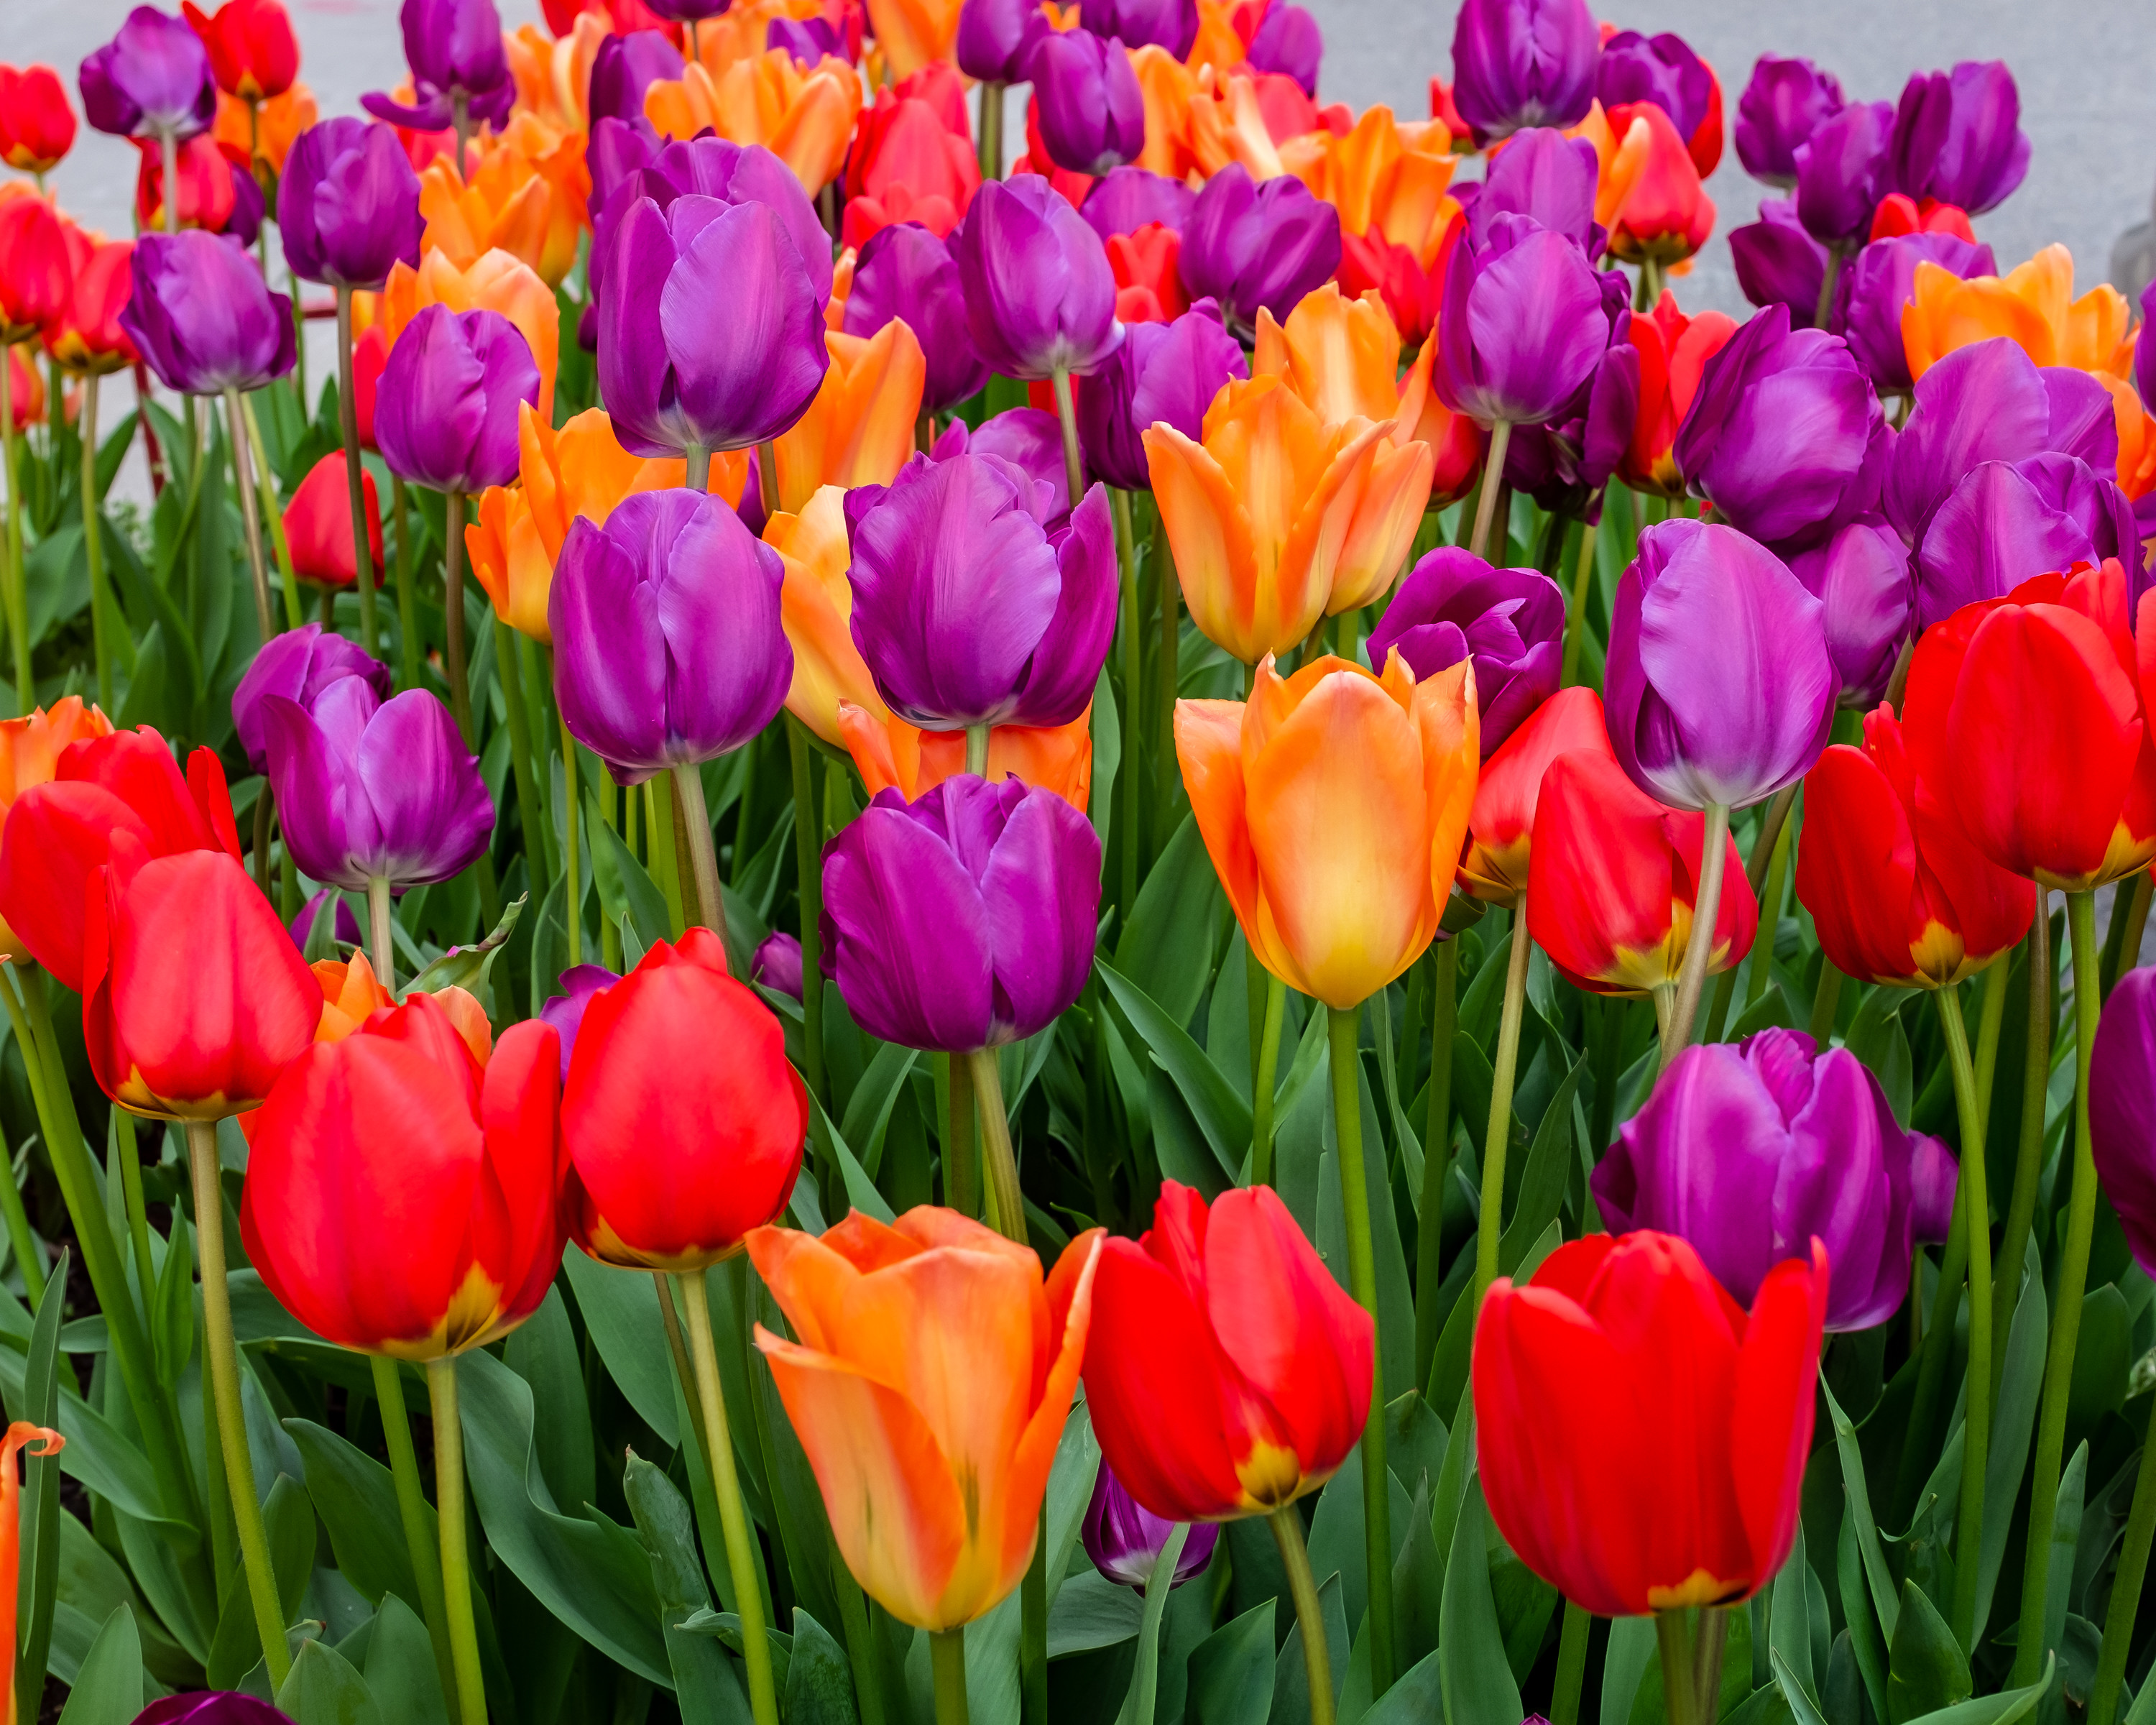 1080p Tulips Hd Images